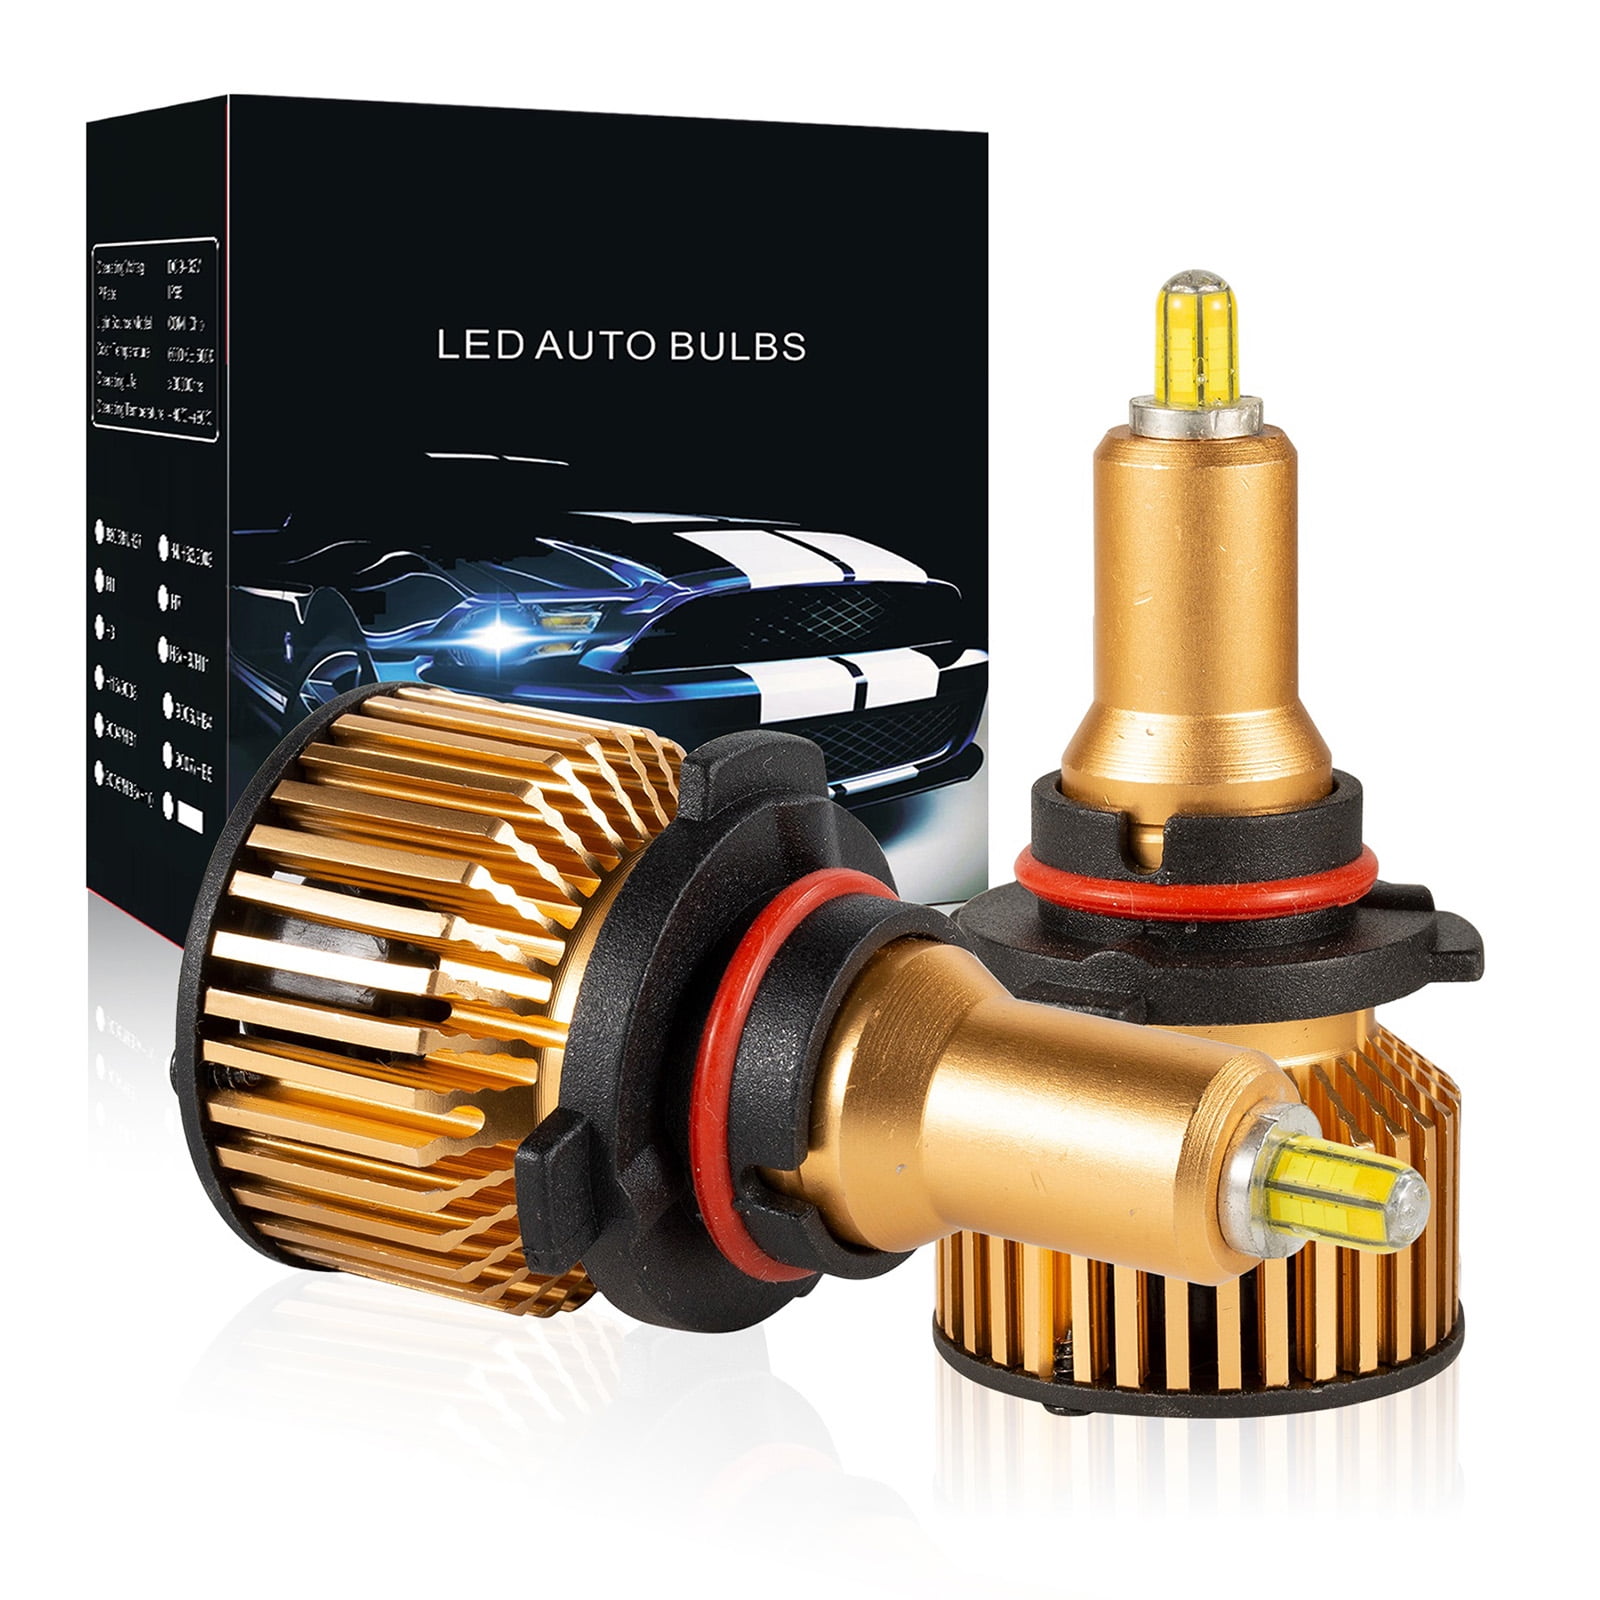 -Gold H1 LED Headlight Bulbs 6500k 12000LM Extremely Bright Car bulbs All 2-PACK One Aluminum COB Chips Conversion Kit in 